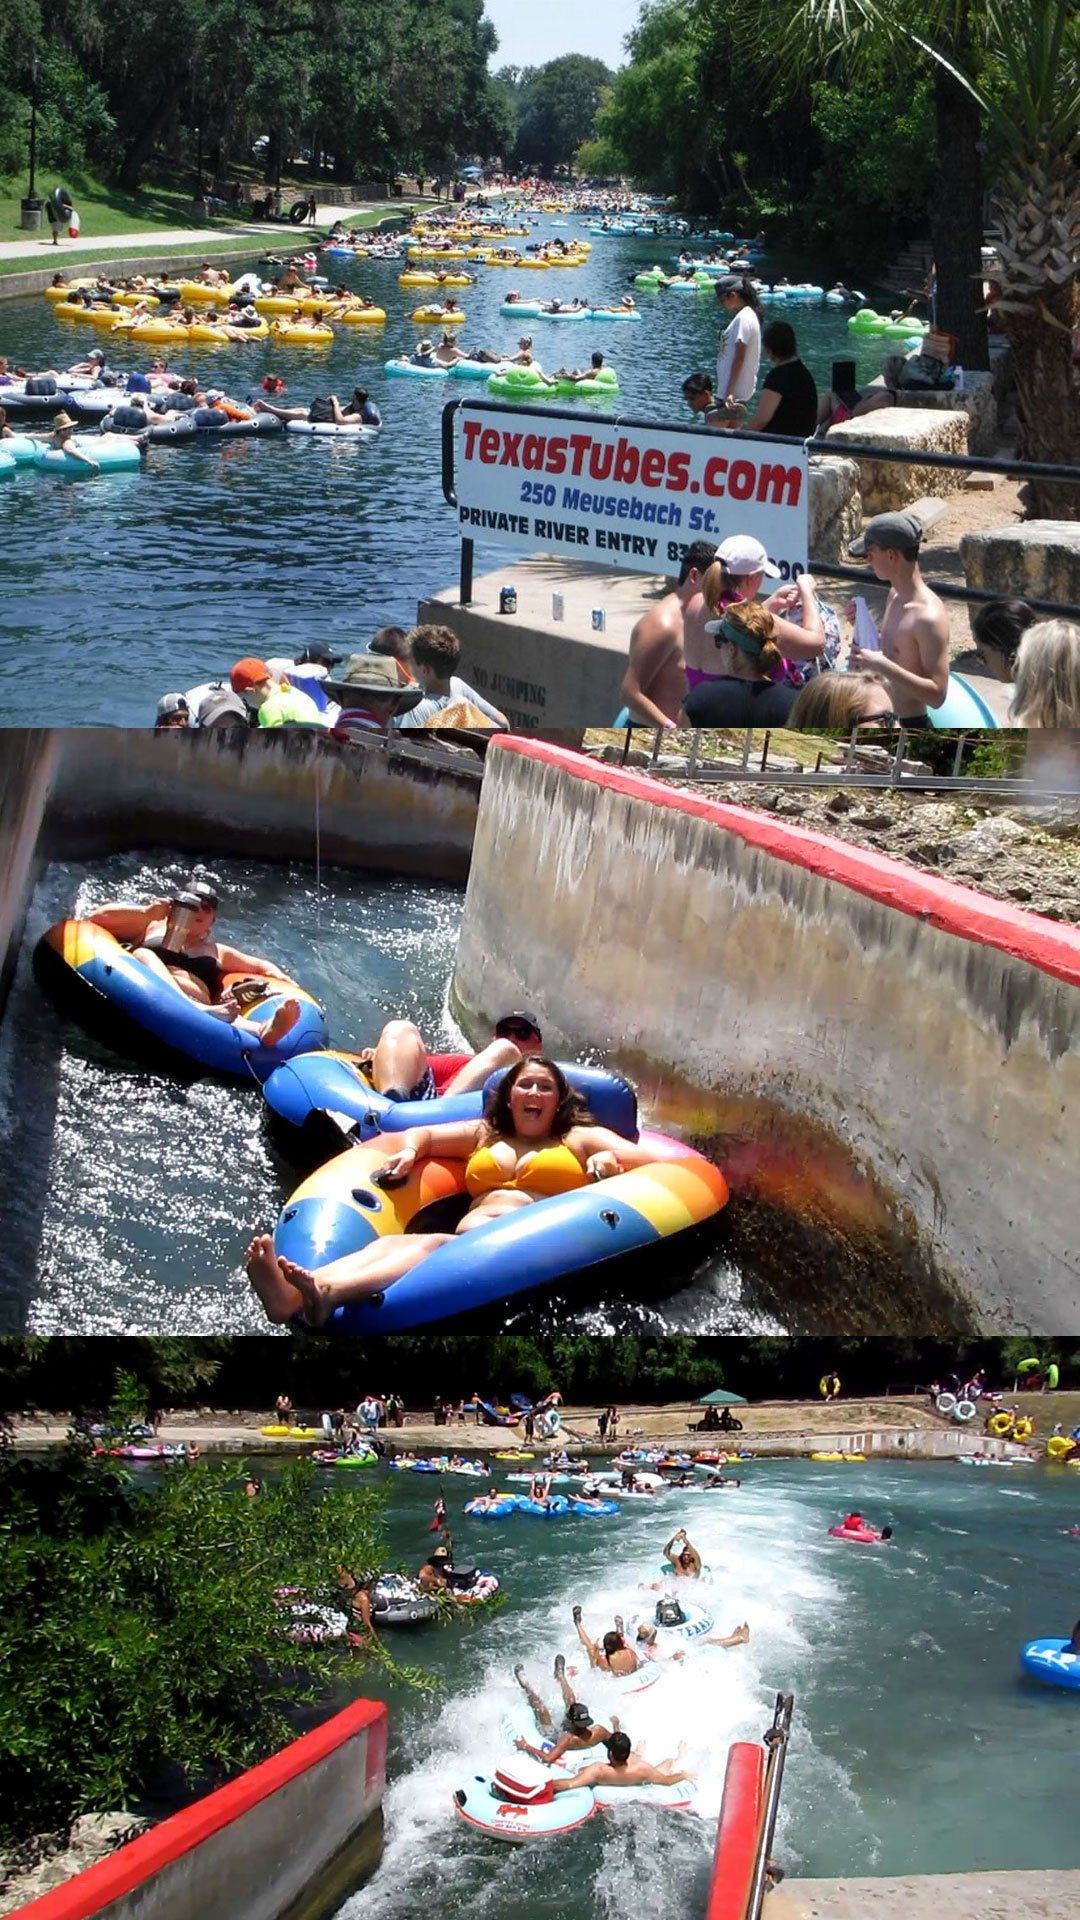 Exciting pictures of Comal River Tubing & the thrilling Tube Chute at Texas Tubes in New Braunfels